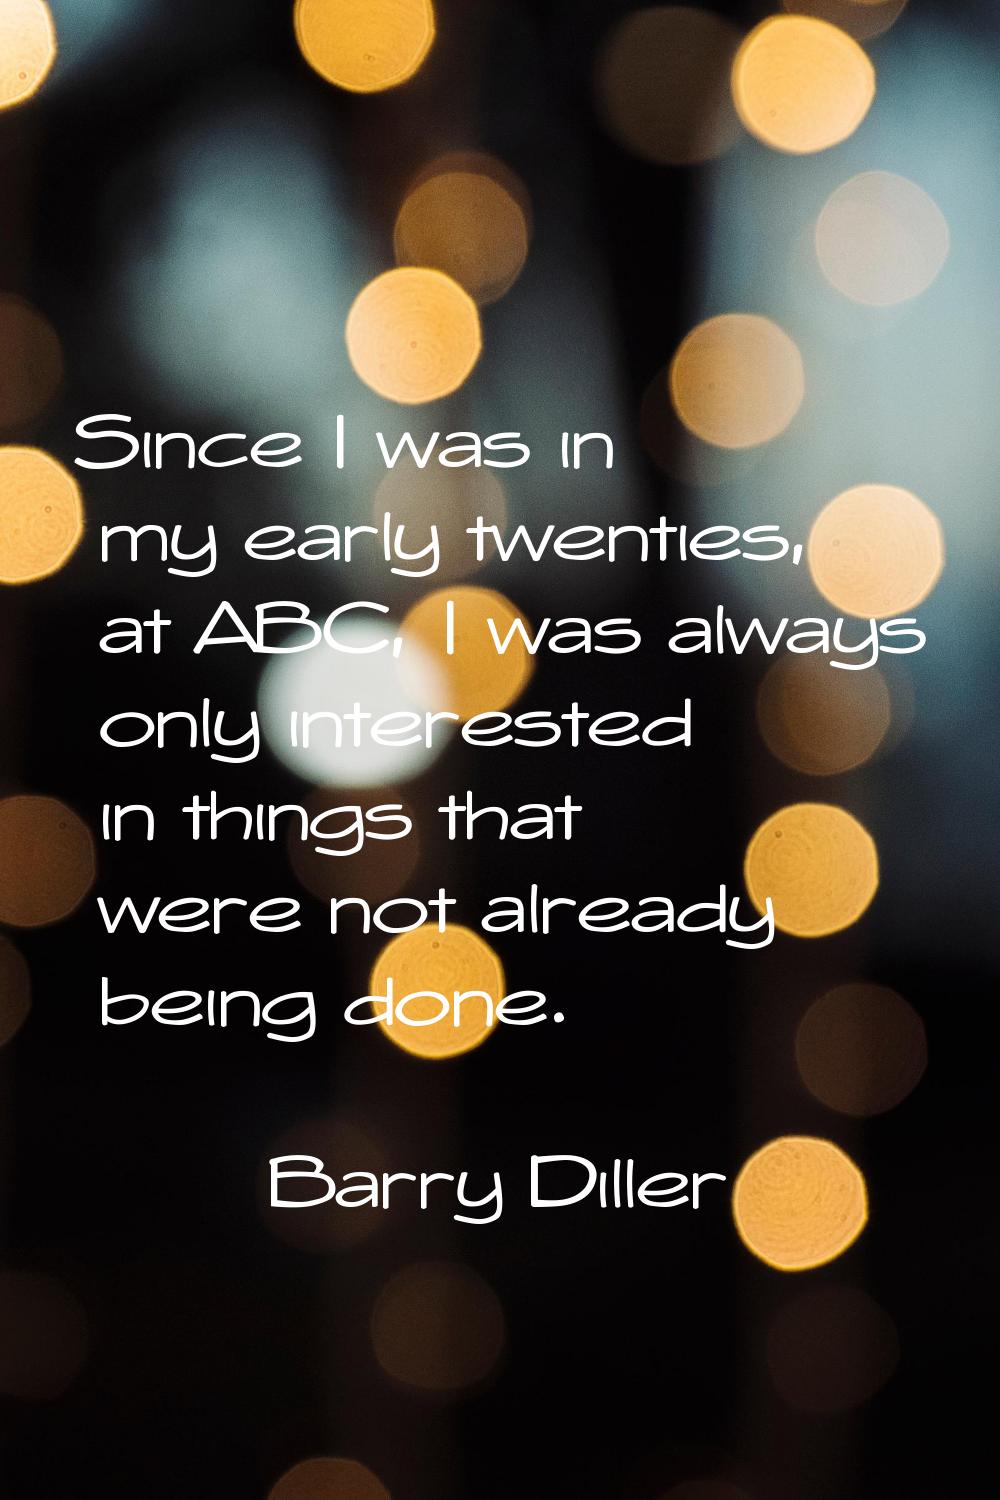 Since I was in my early twenties, at ABC, I was always only interested in things that were not alre